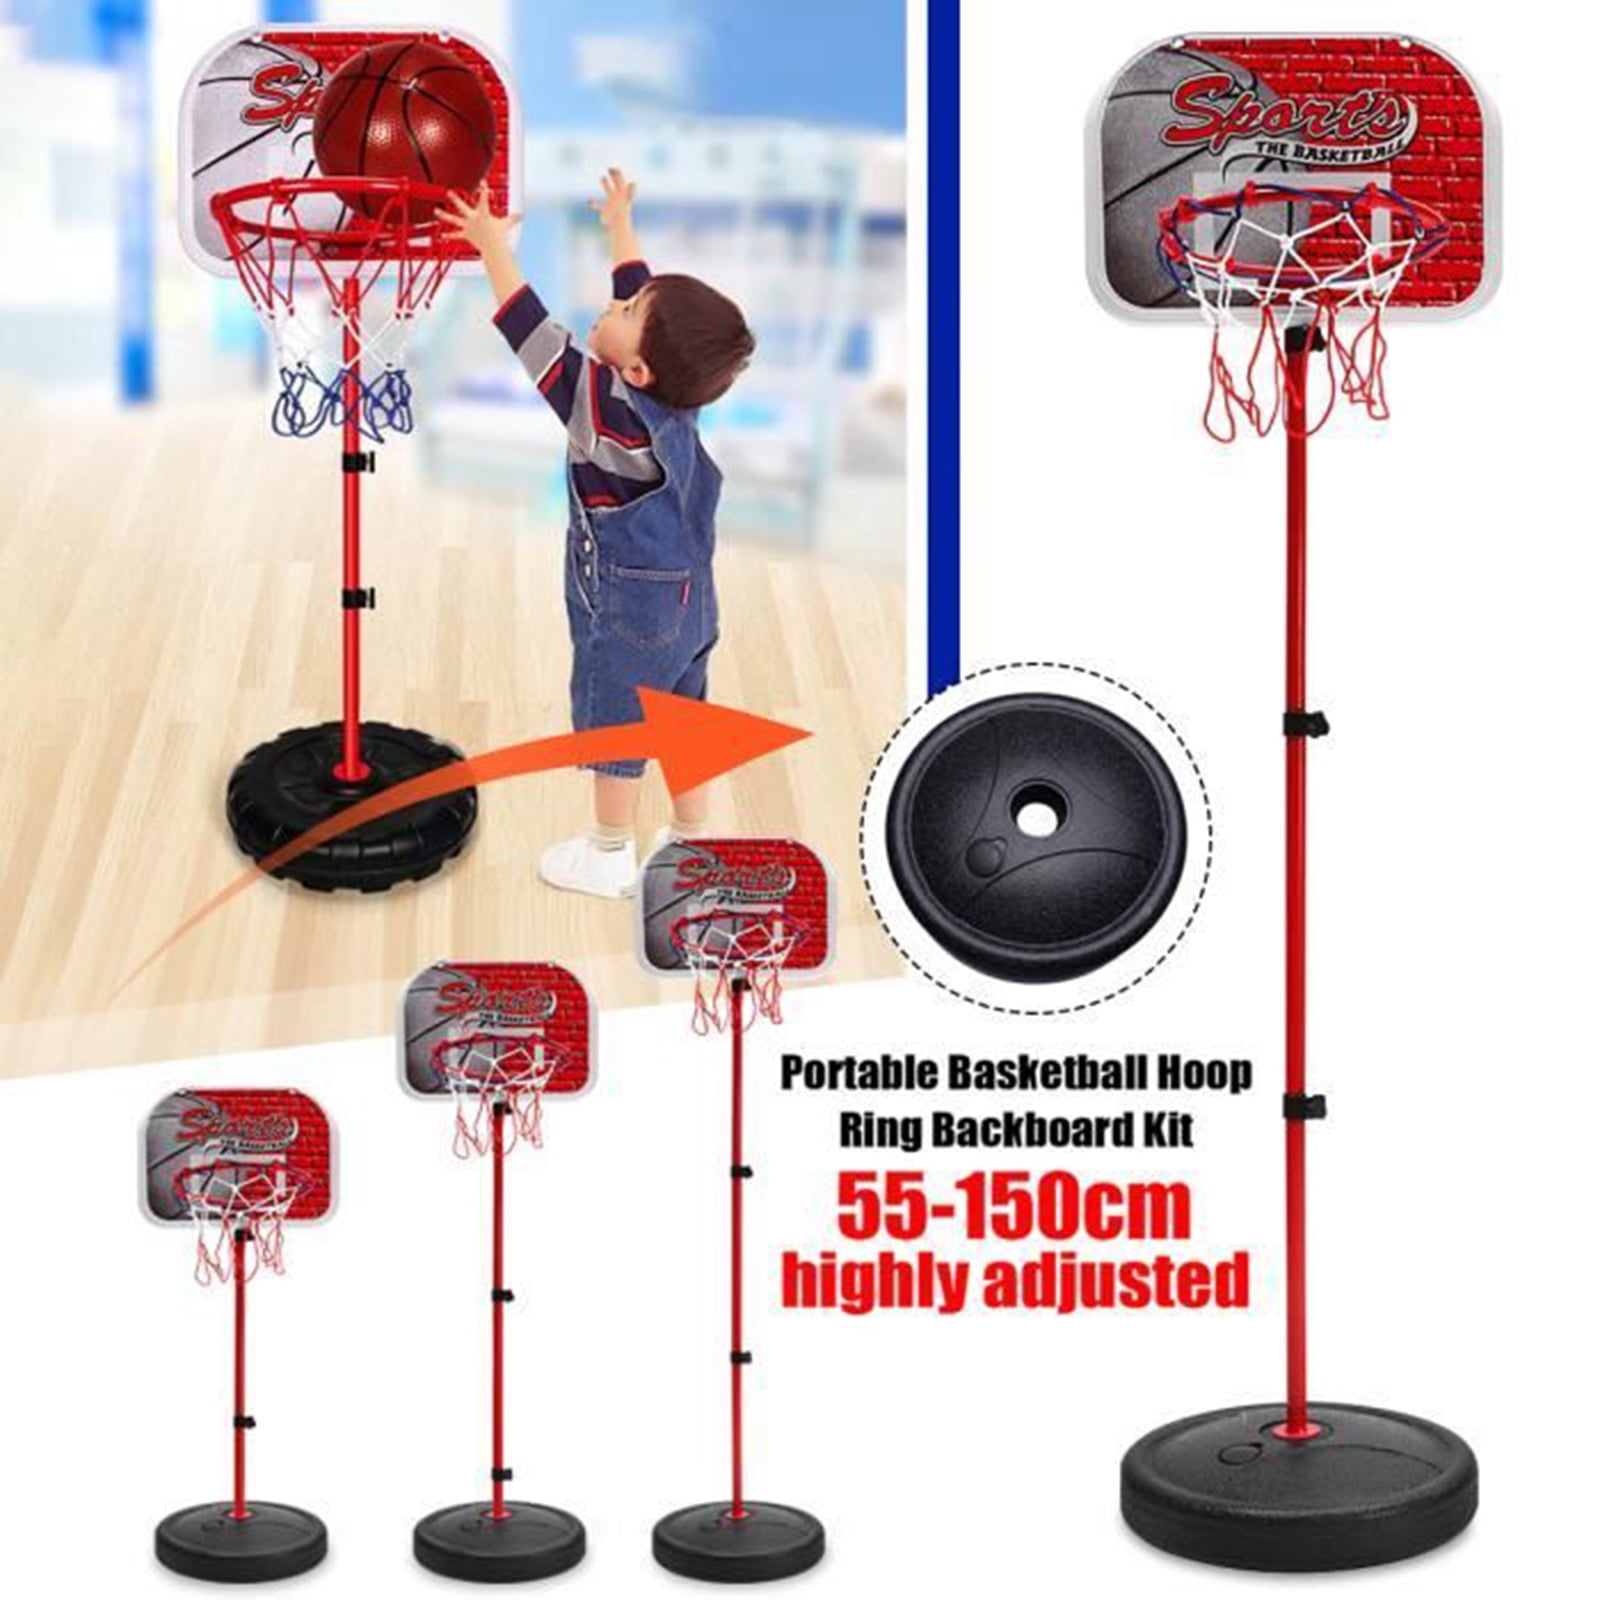 Kids Basketball Set Basketball Hoop Stand Set Adjustable Height 0.45M-1.1M with Ball and Net Play Sport Games Shooting Rack for Children Outdoor Indoor Play